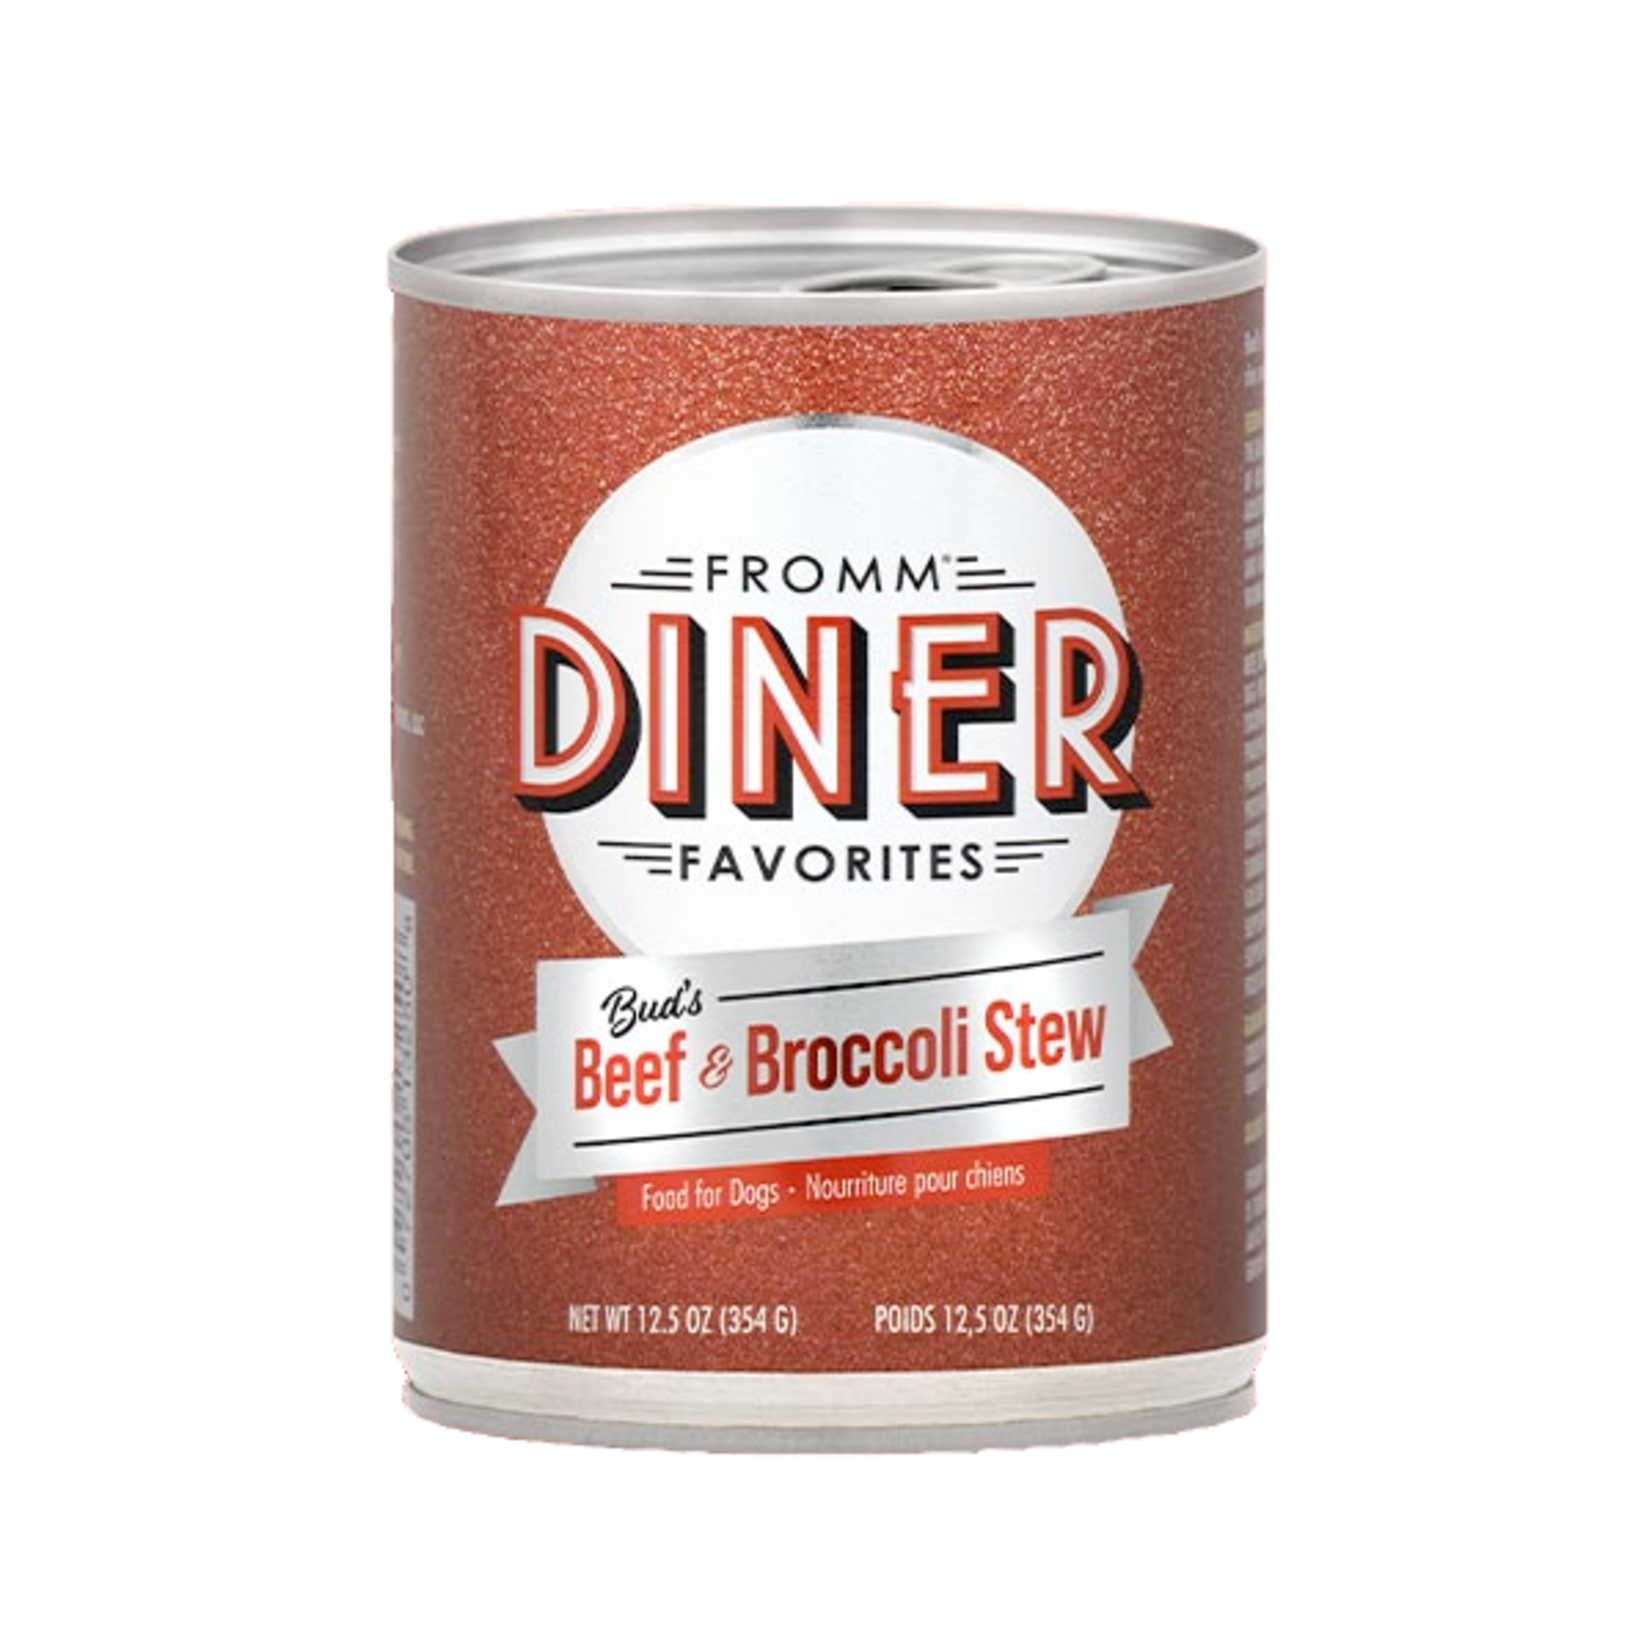 Fromm Fromm Wet Dog Food Diner Favorites Bud's Beef and Broccoli Stew 12oz Can